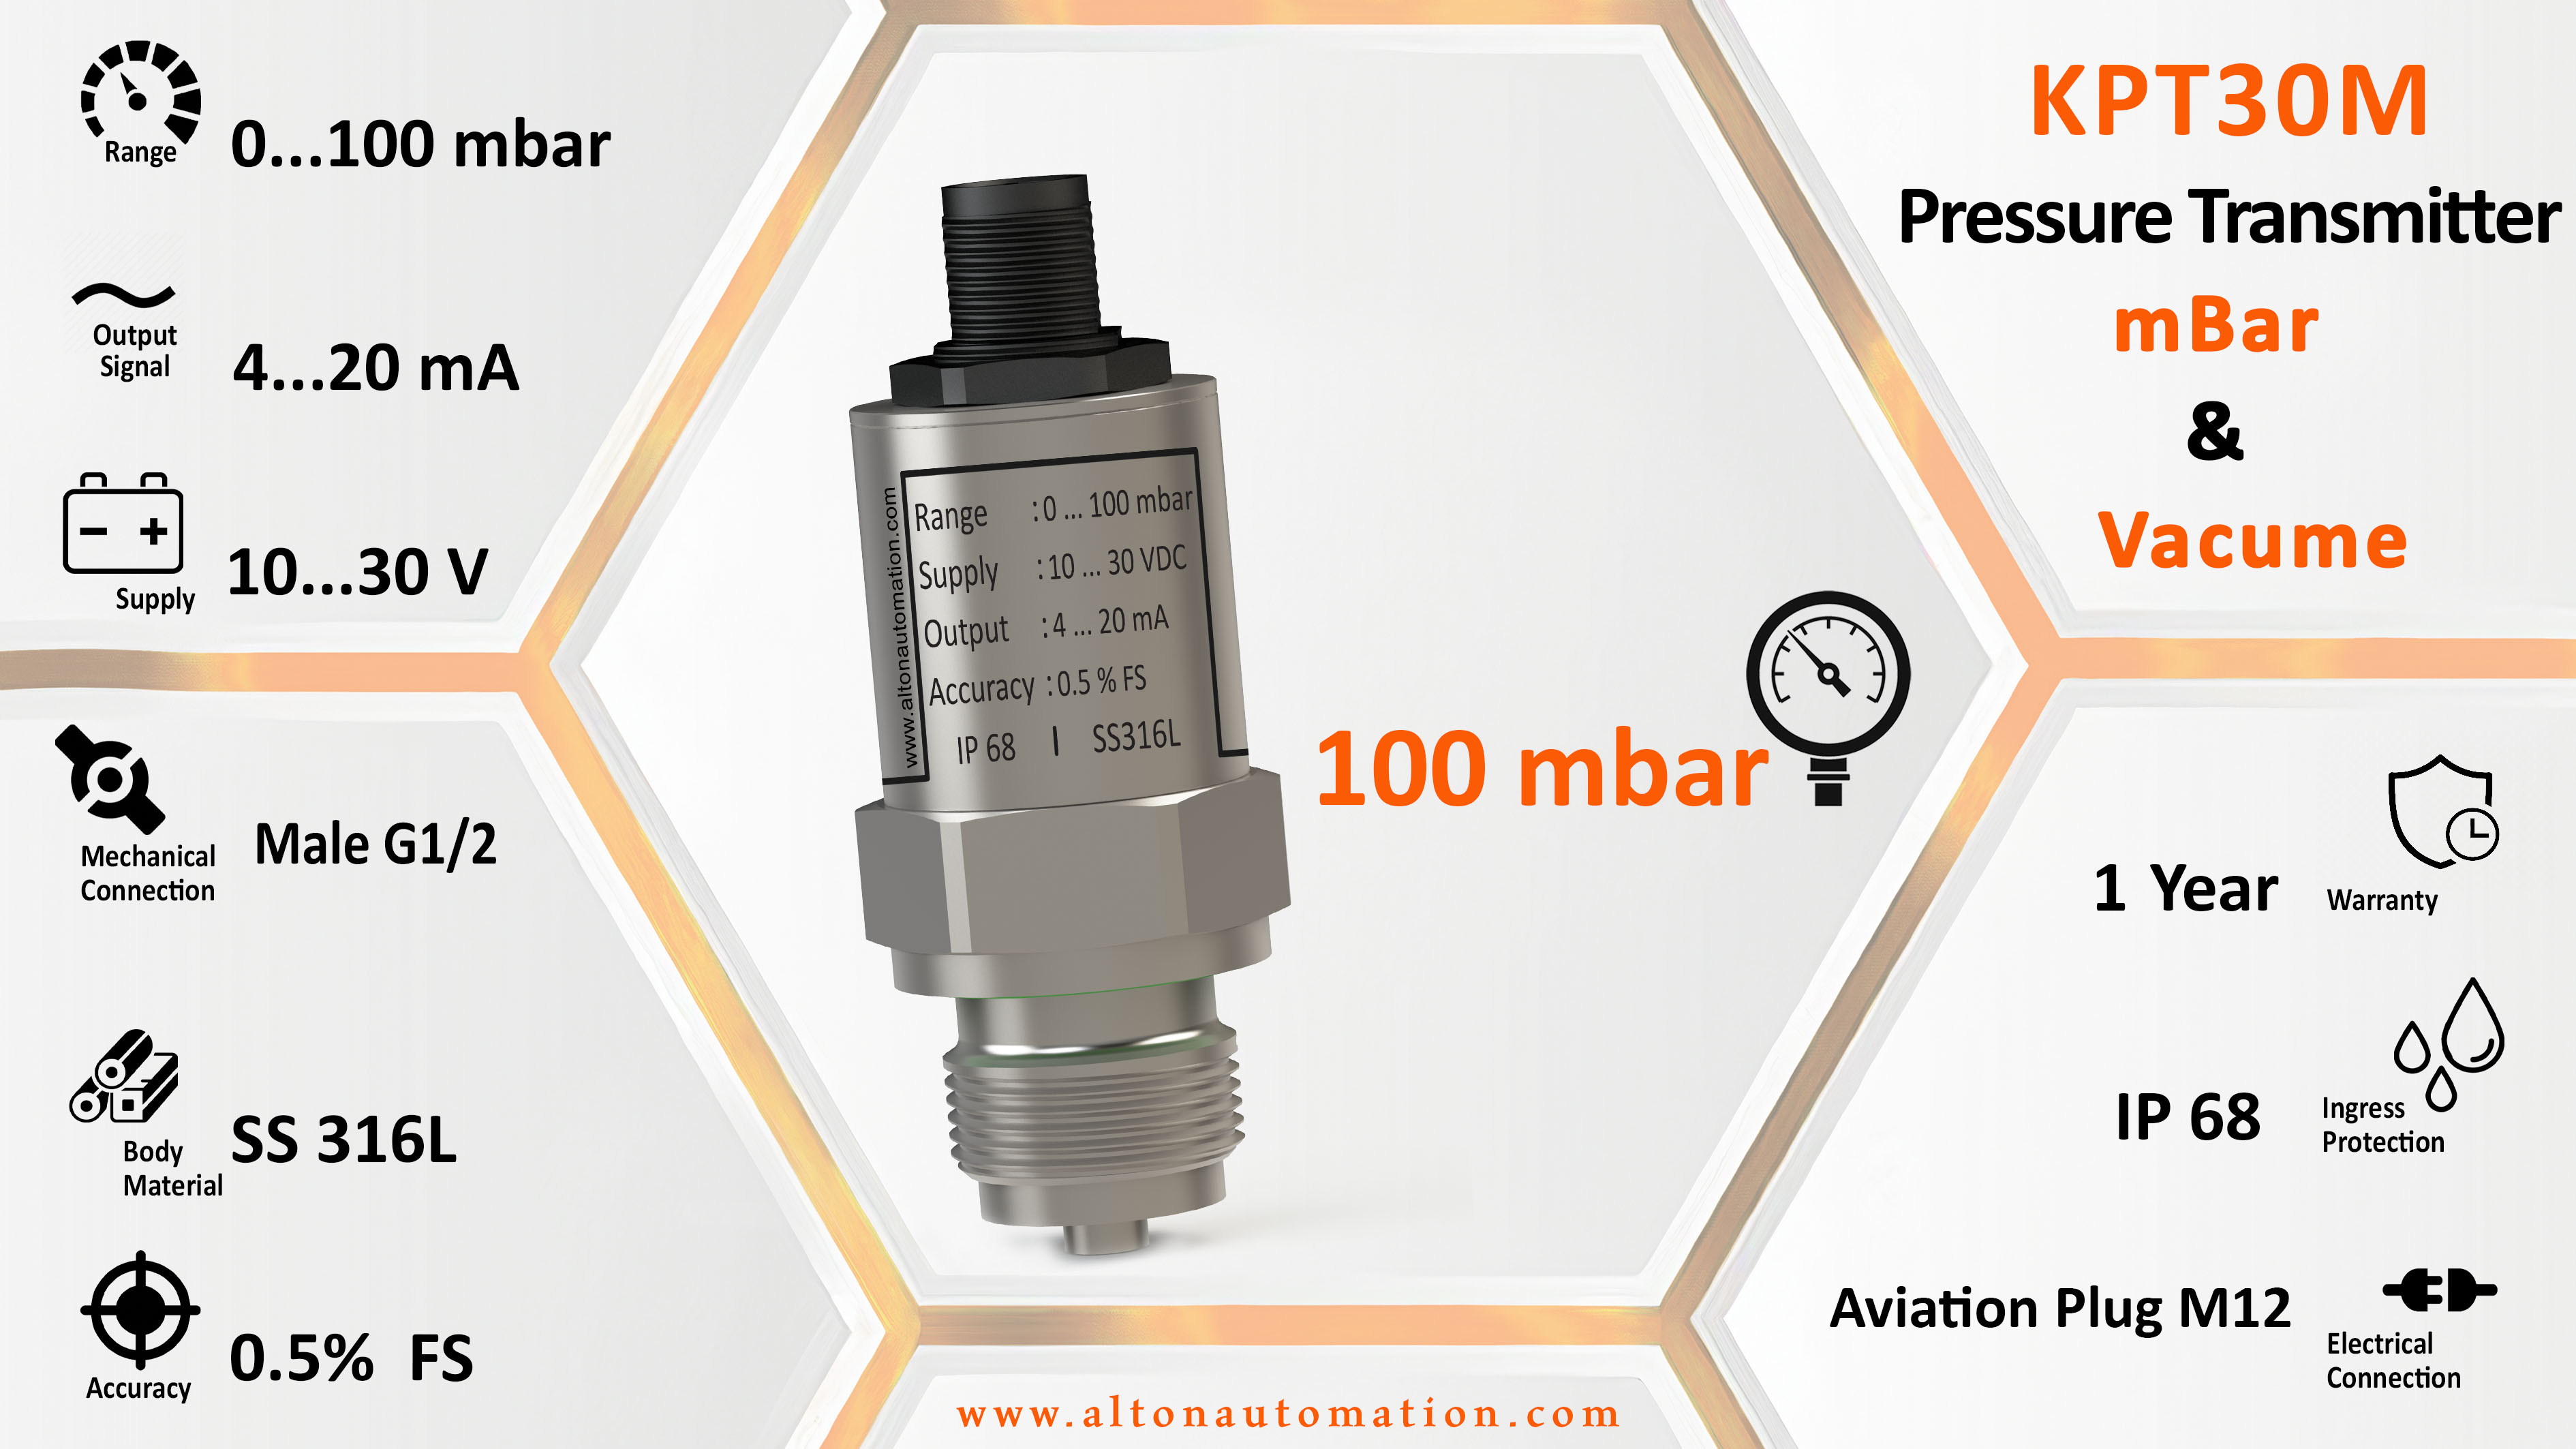 Pressure Transmitter for mbar and vacume_KPT30M-.10-C1-MG2_image_2